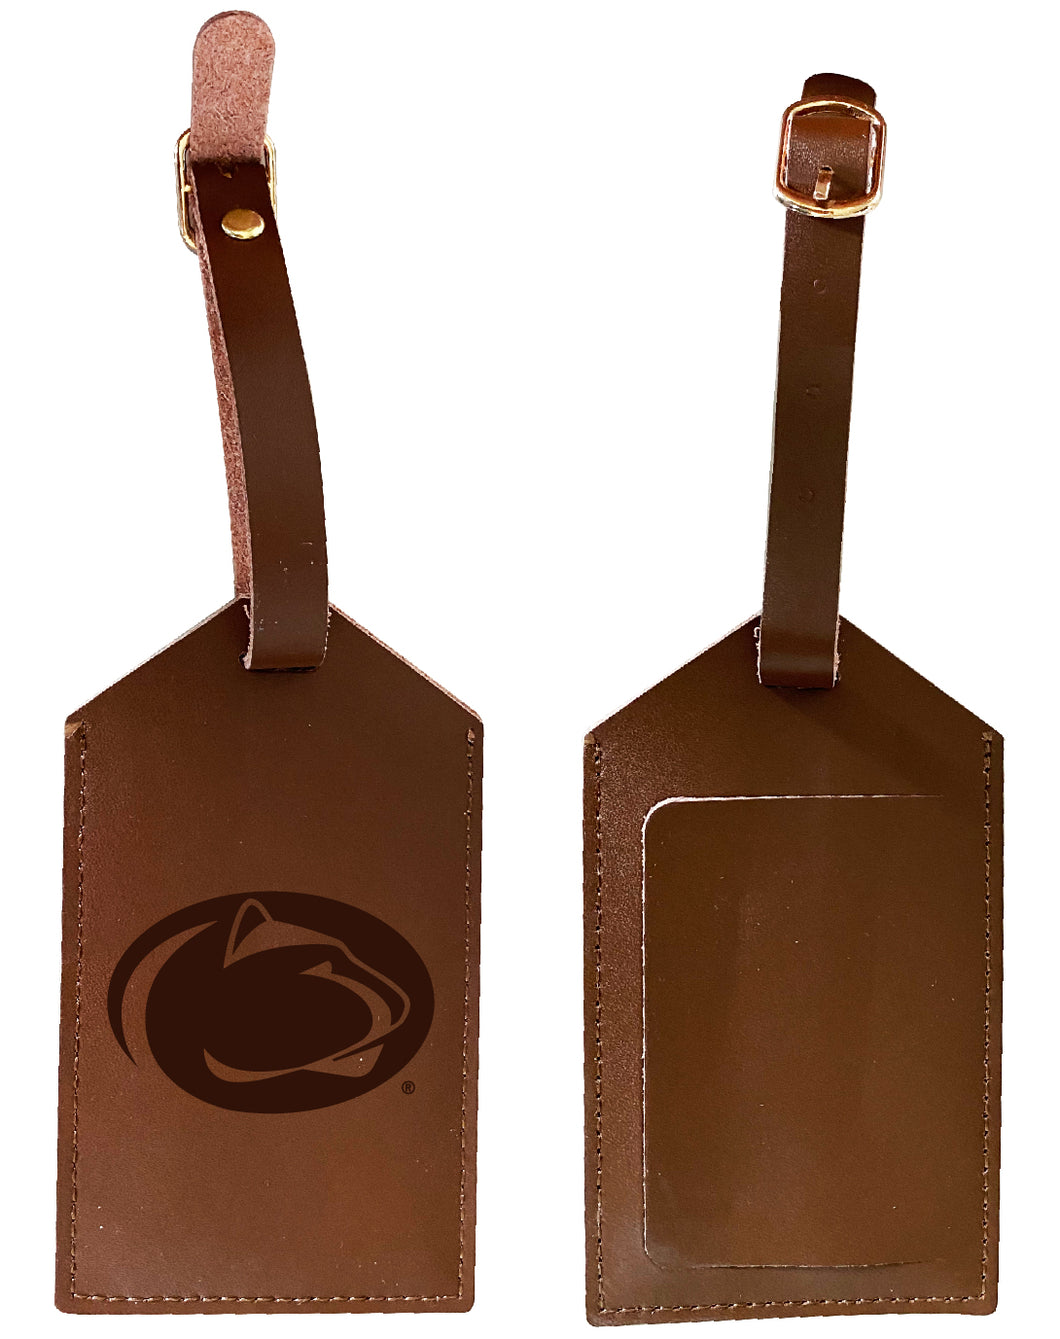 Elegant Penn State Nittany Lions NCAA Leather Luggage Tag with Engraved Logo